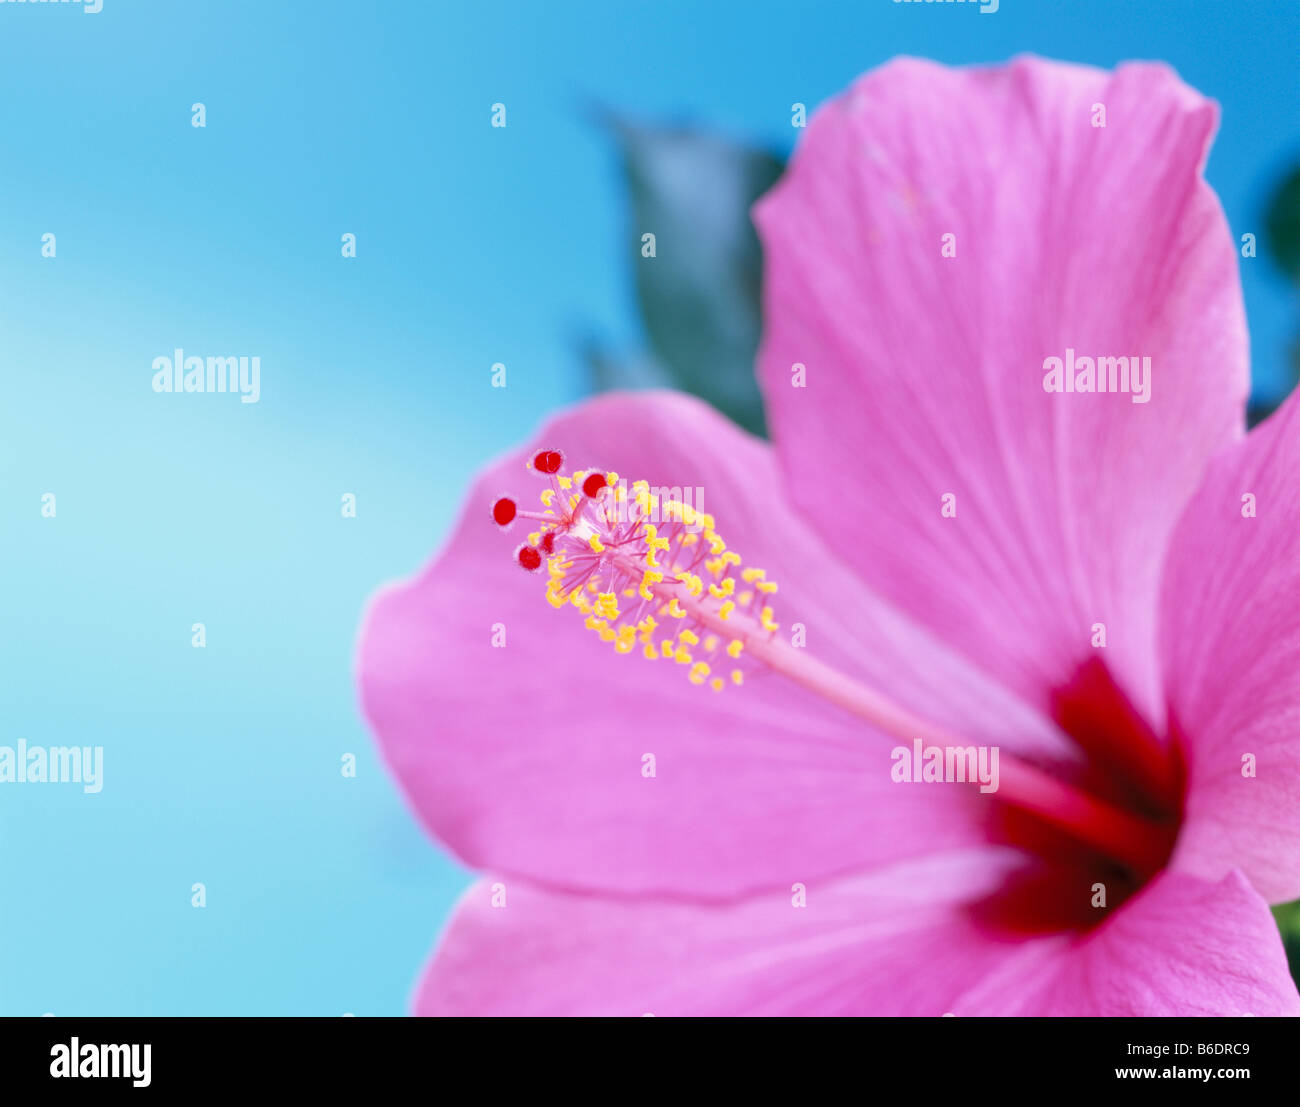 Hibiscus or rosemallow,flower and reproductive organs. Stock Photo